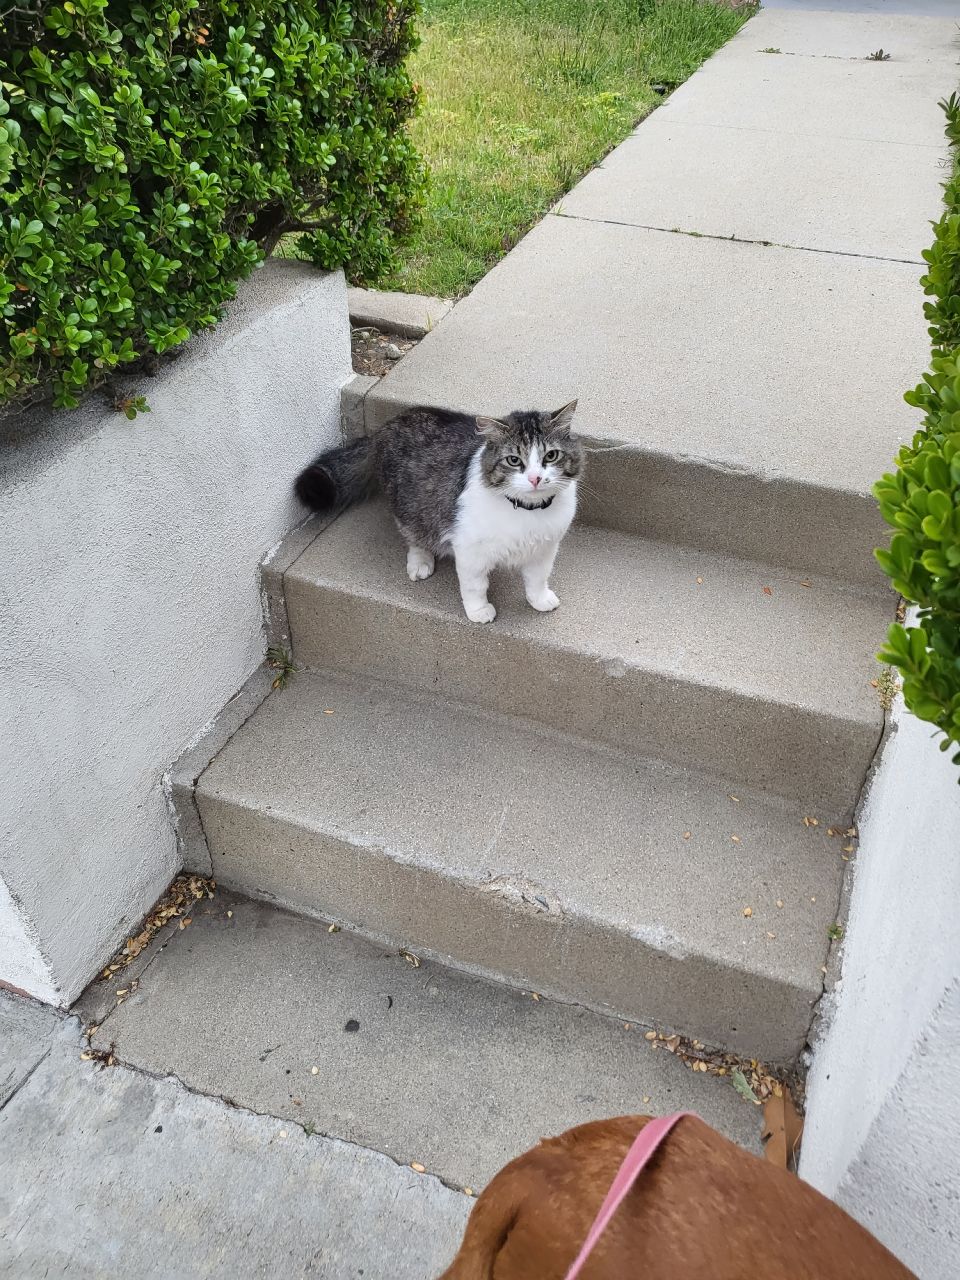 He waits for me at the neighbor steps